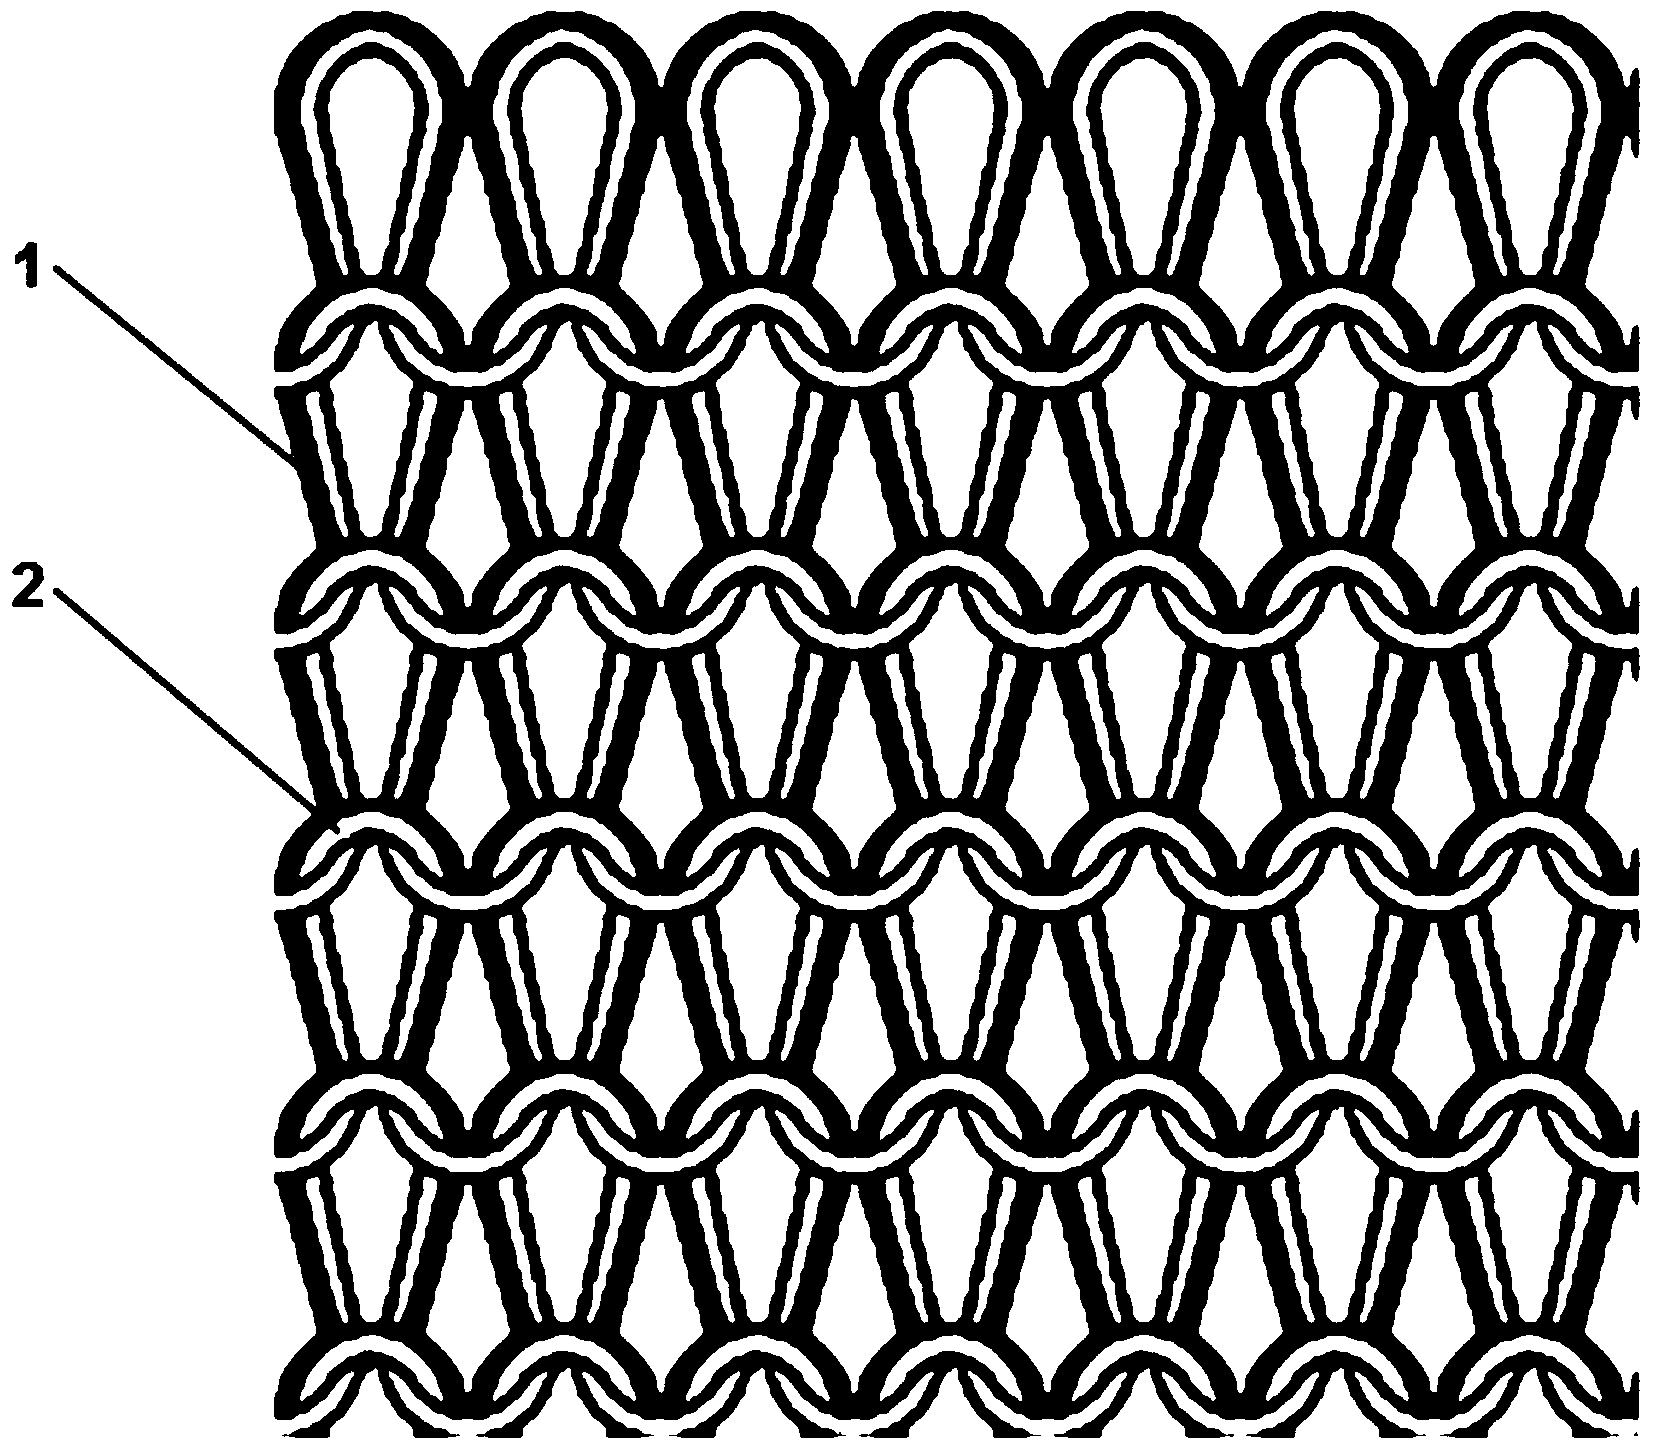 Purl high-density functional knitted fabric and manufacturing method thereof